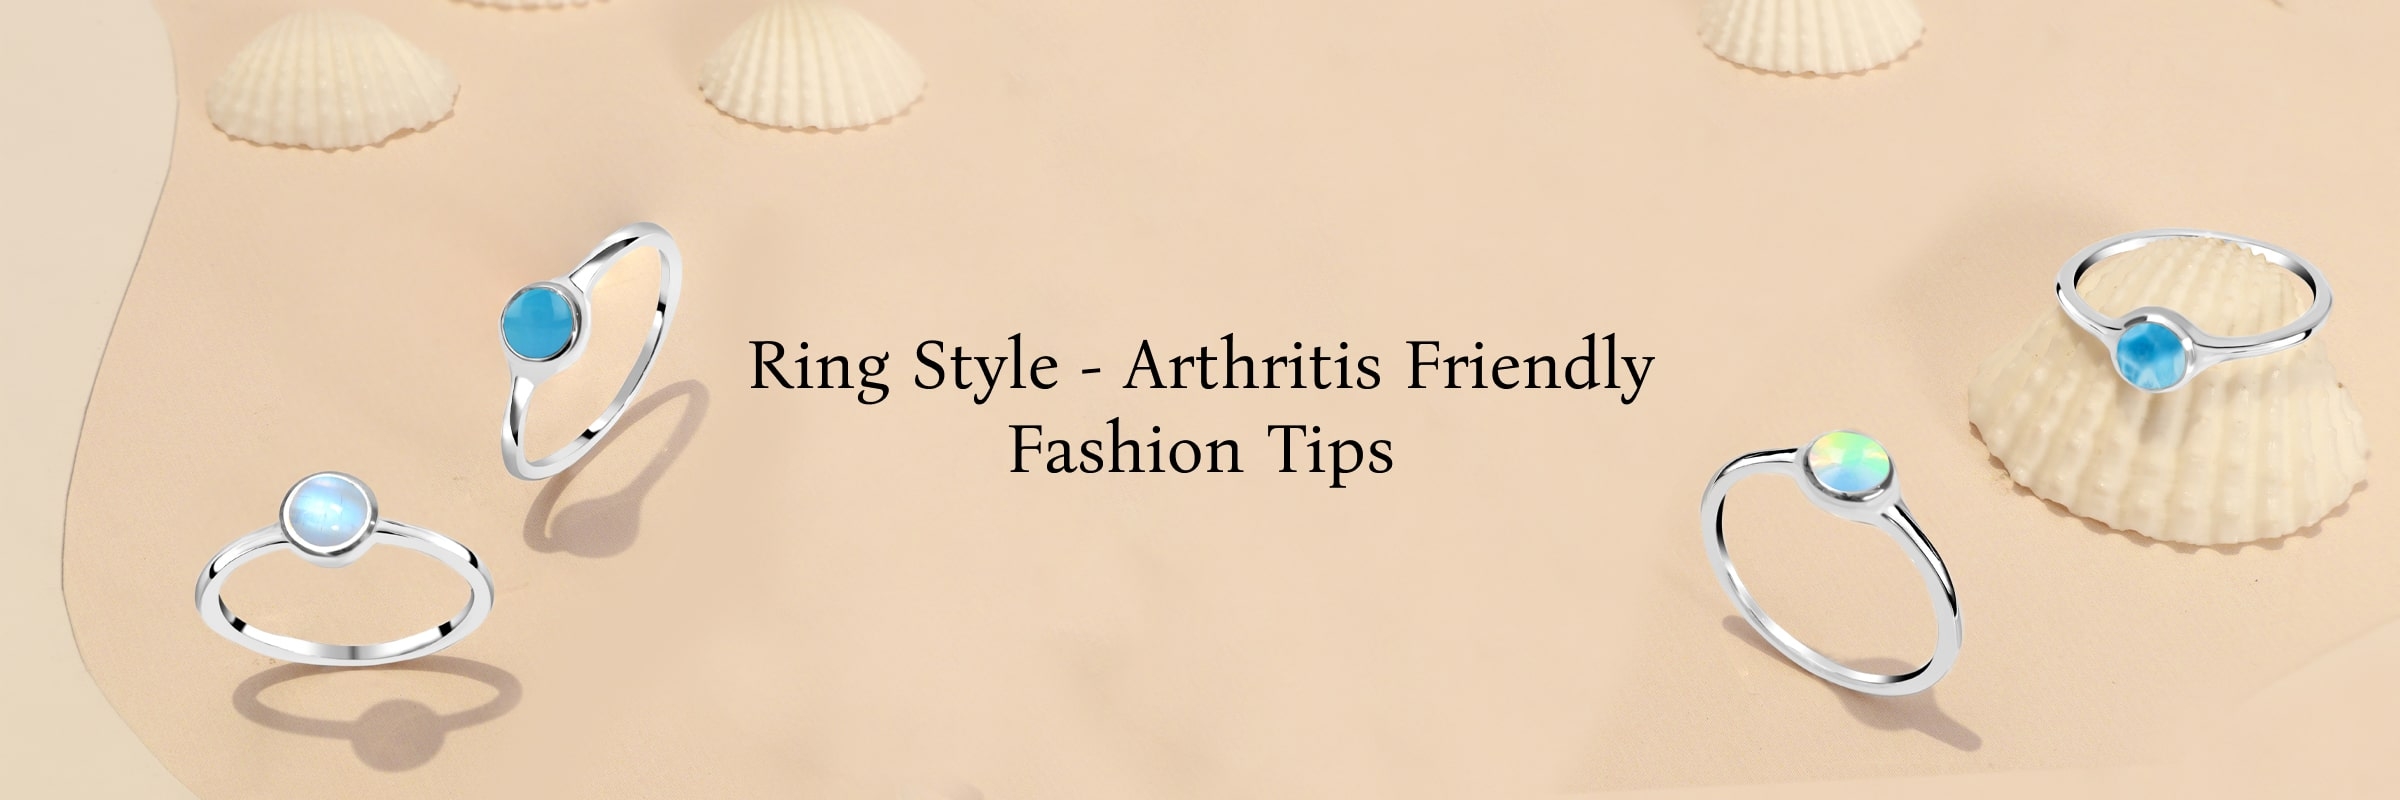 How to Wear Rings with Arthritic Fingers